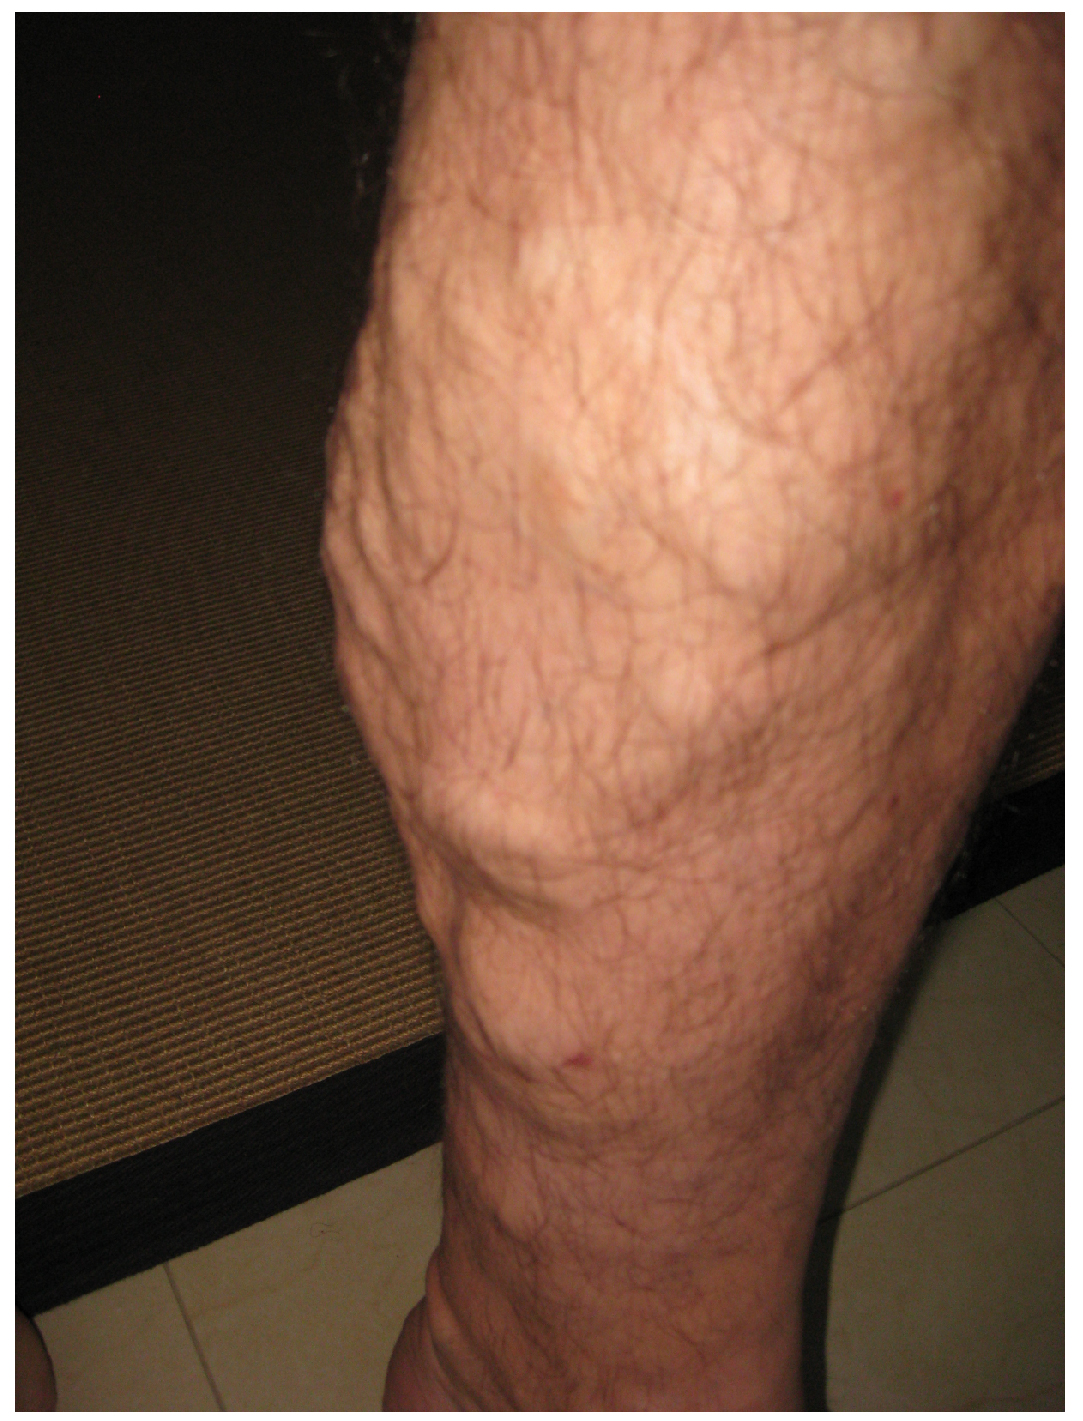 This photo shows a person’s leg with varicose veins